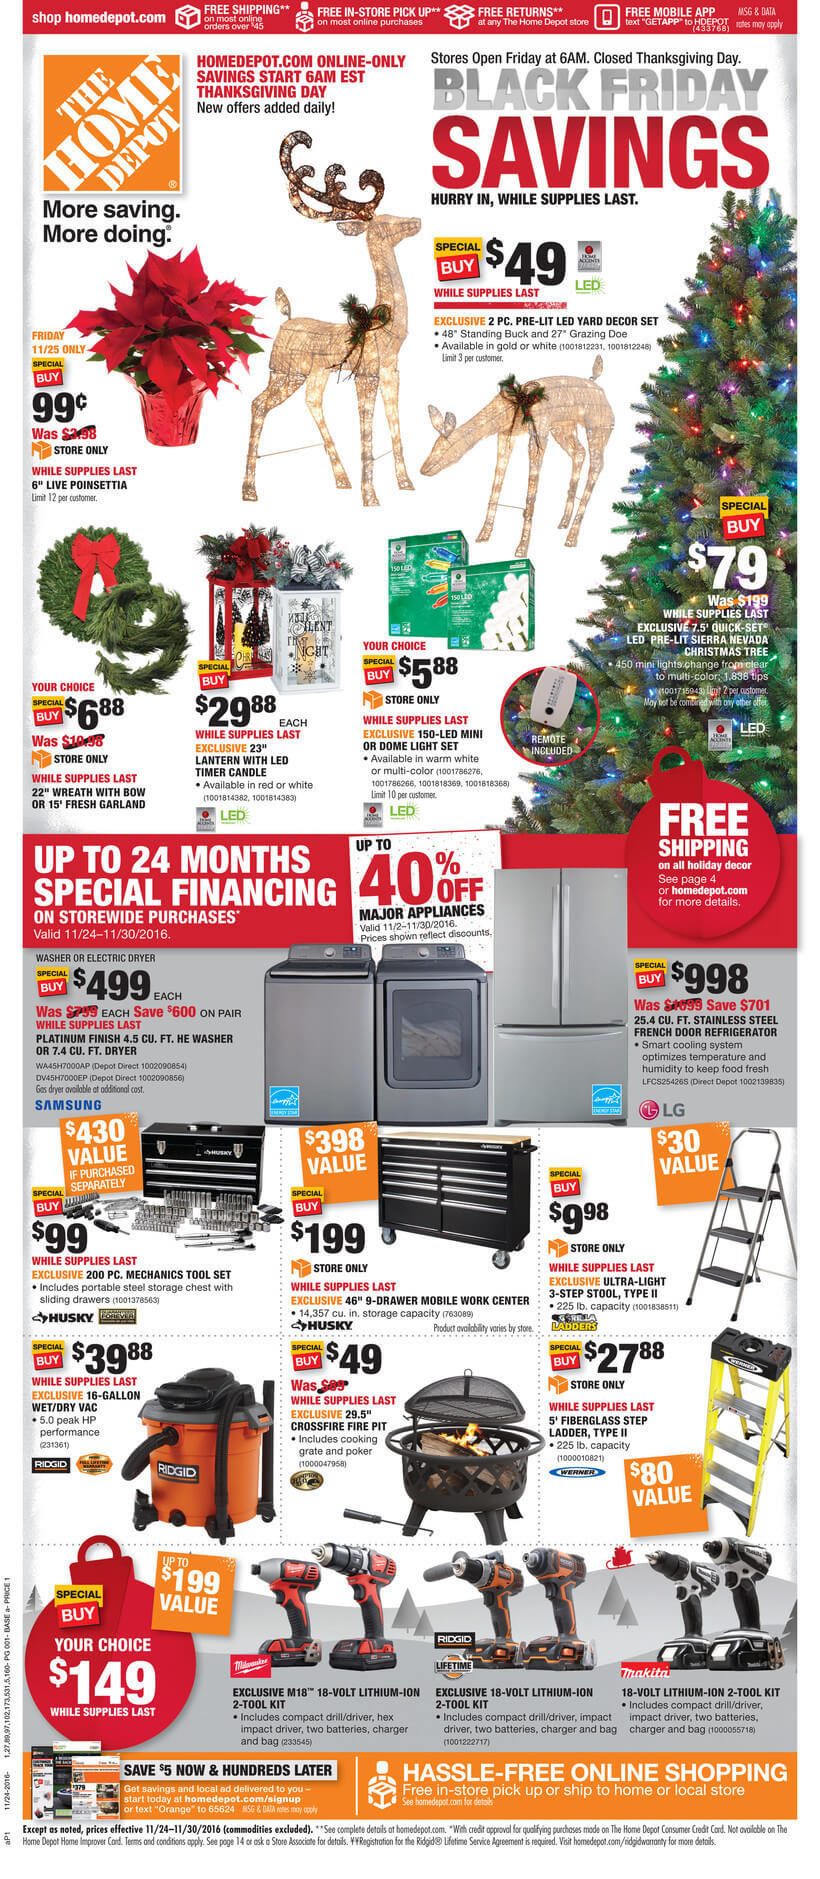 Home Depot Black Friday 2016 Ad - Page 1